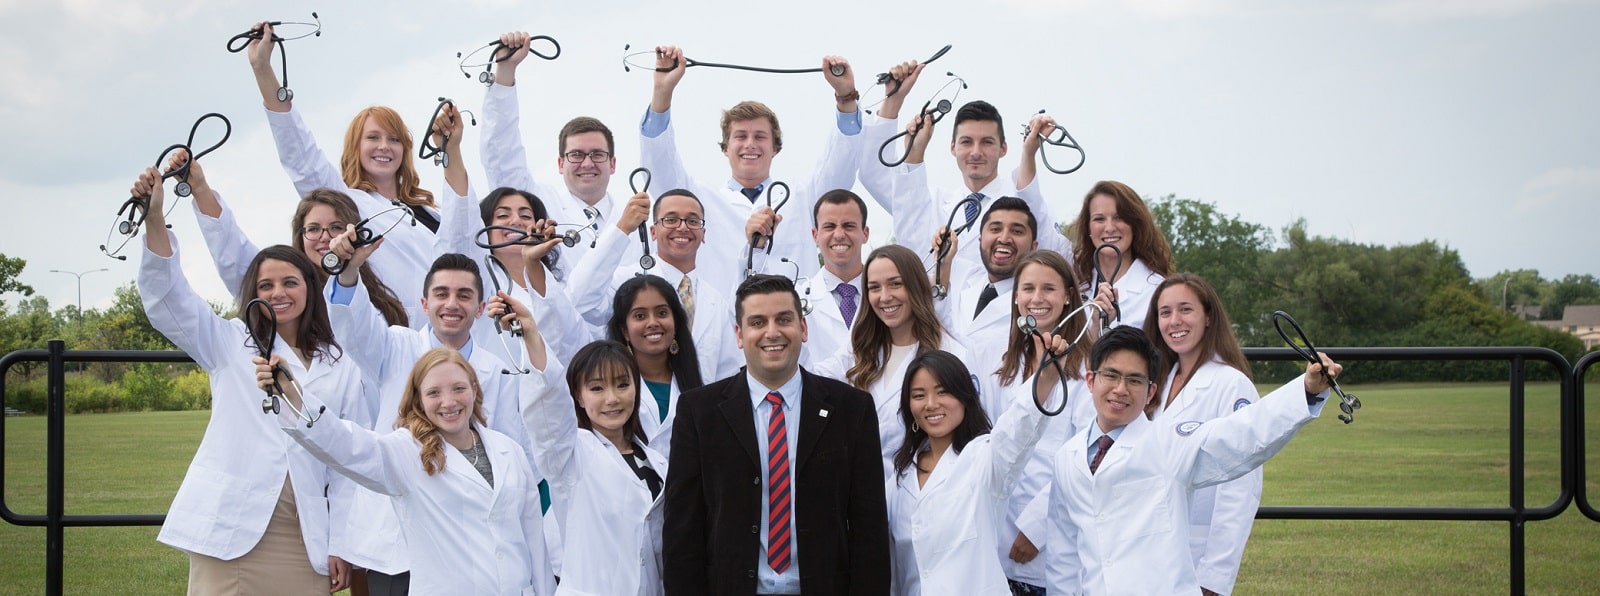 A PRISM group stands together wearing their white coats, smiling, and holding their stethoscopes above their heads.